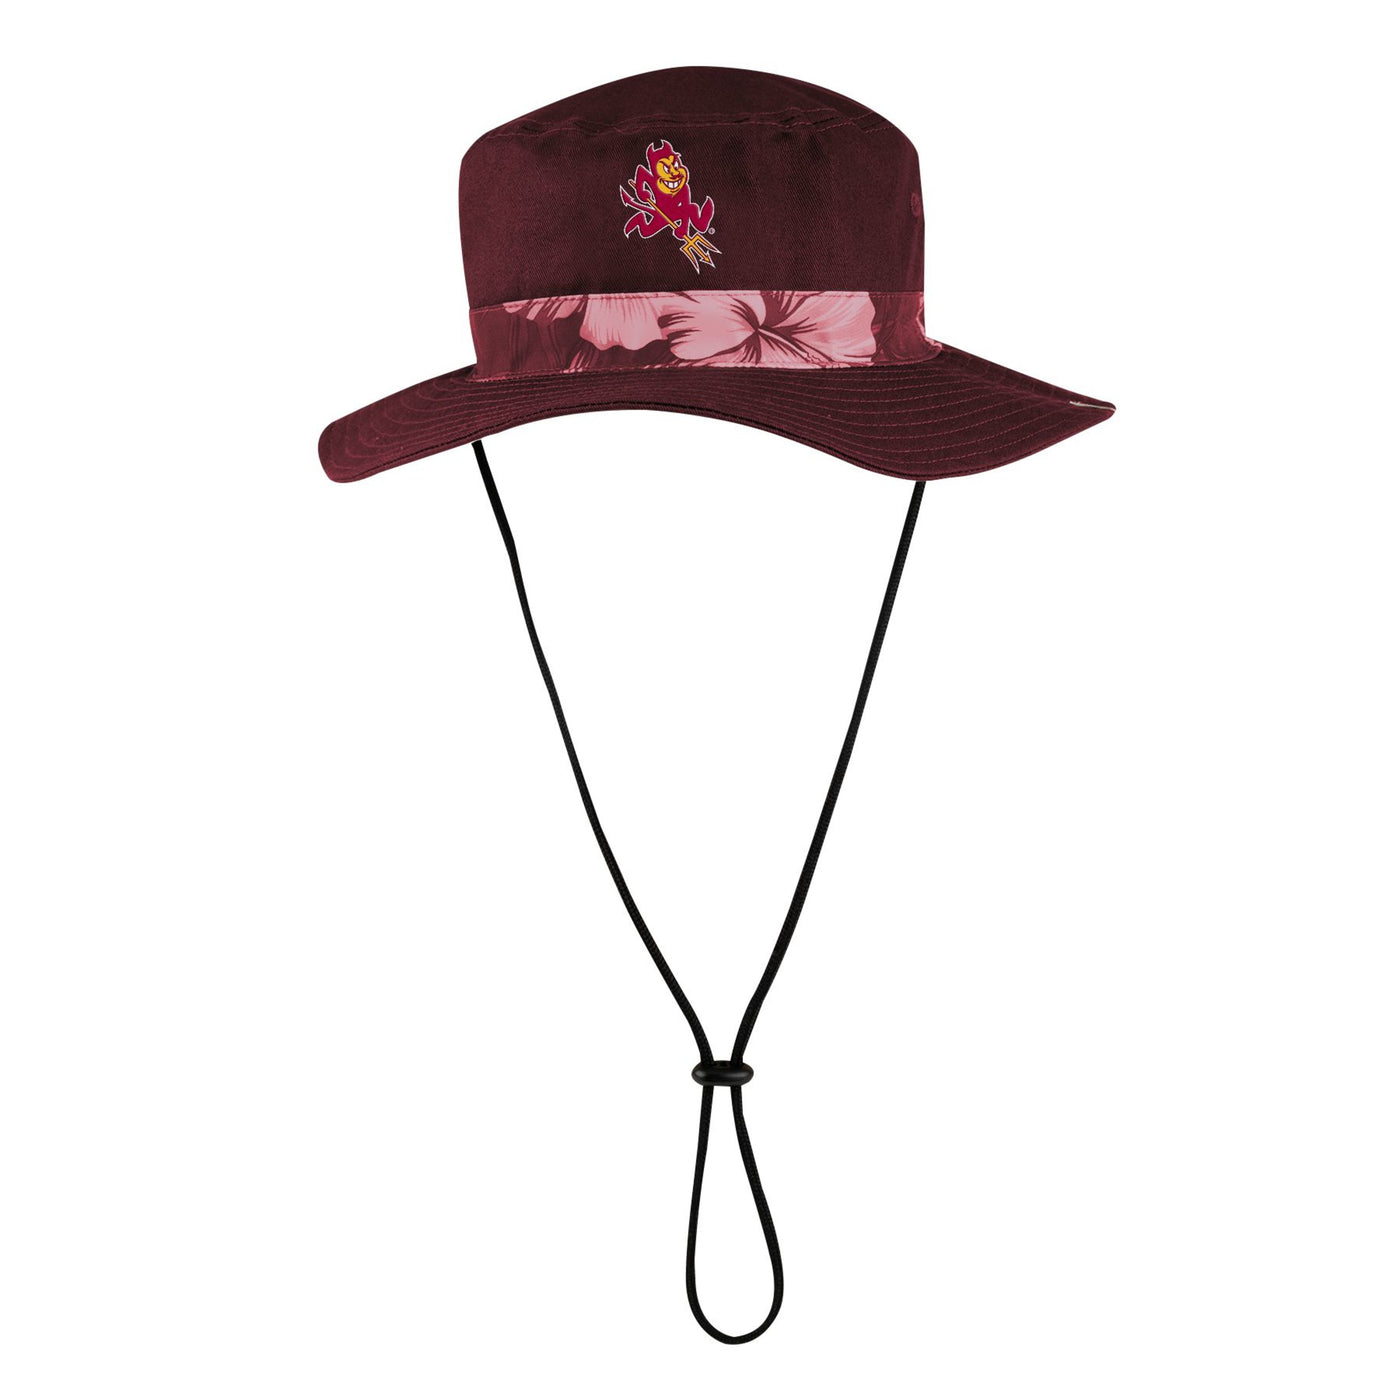 ASU maroon bucket hat with a Hawaiian floral pattern also maroon in a stripe around the hat and a small sparky mascot at the front.